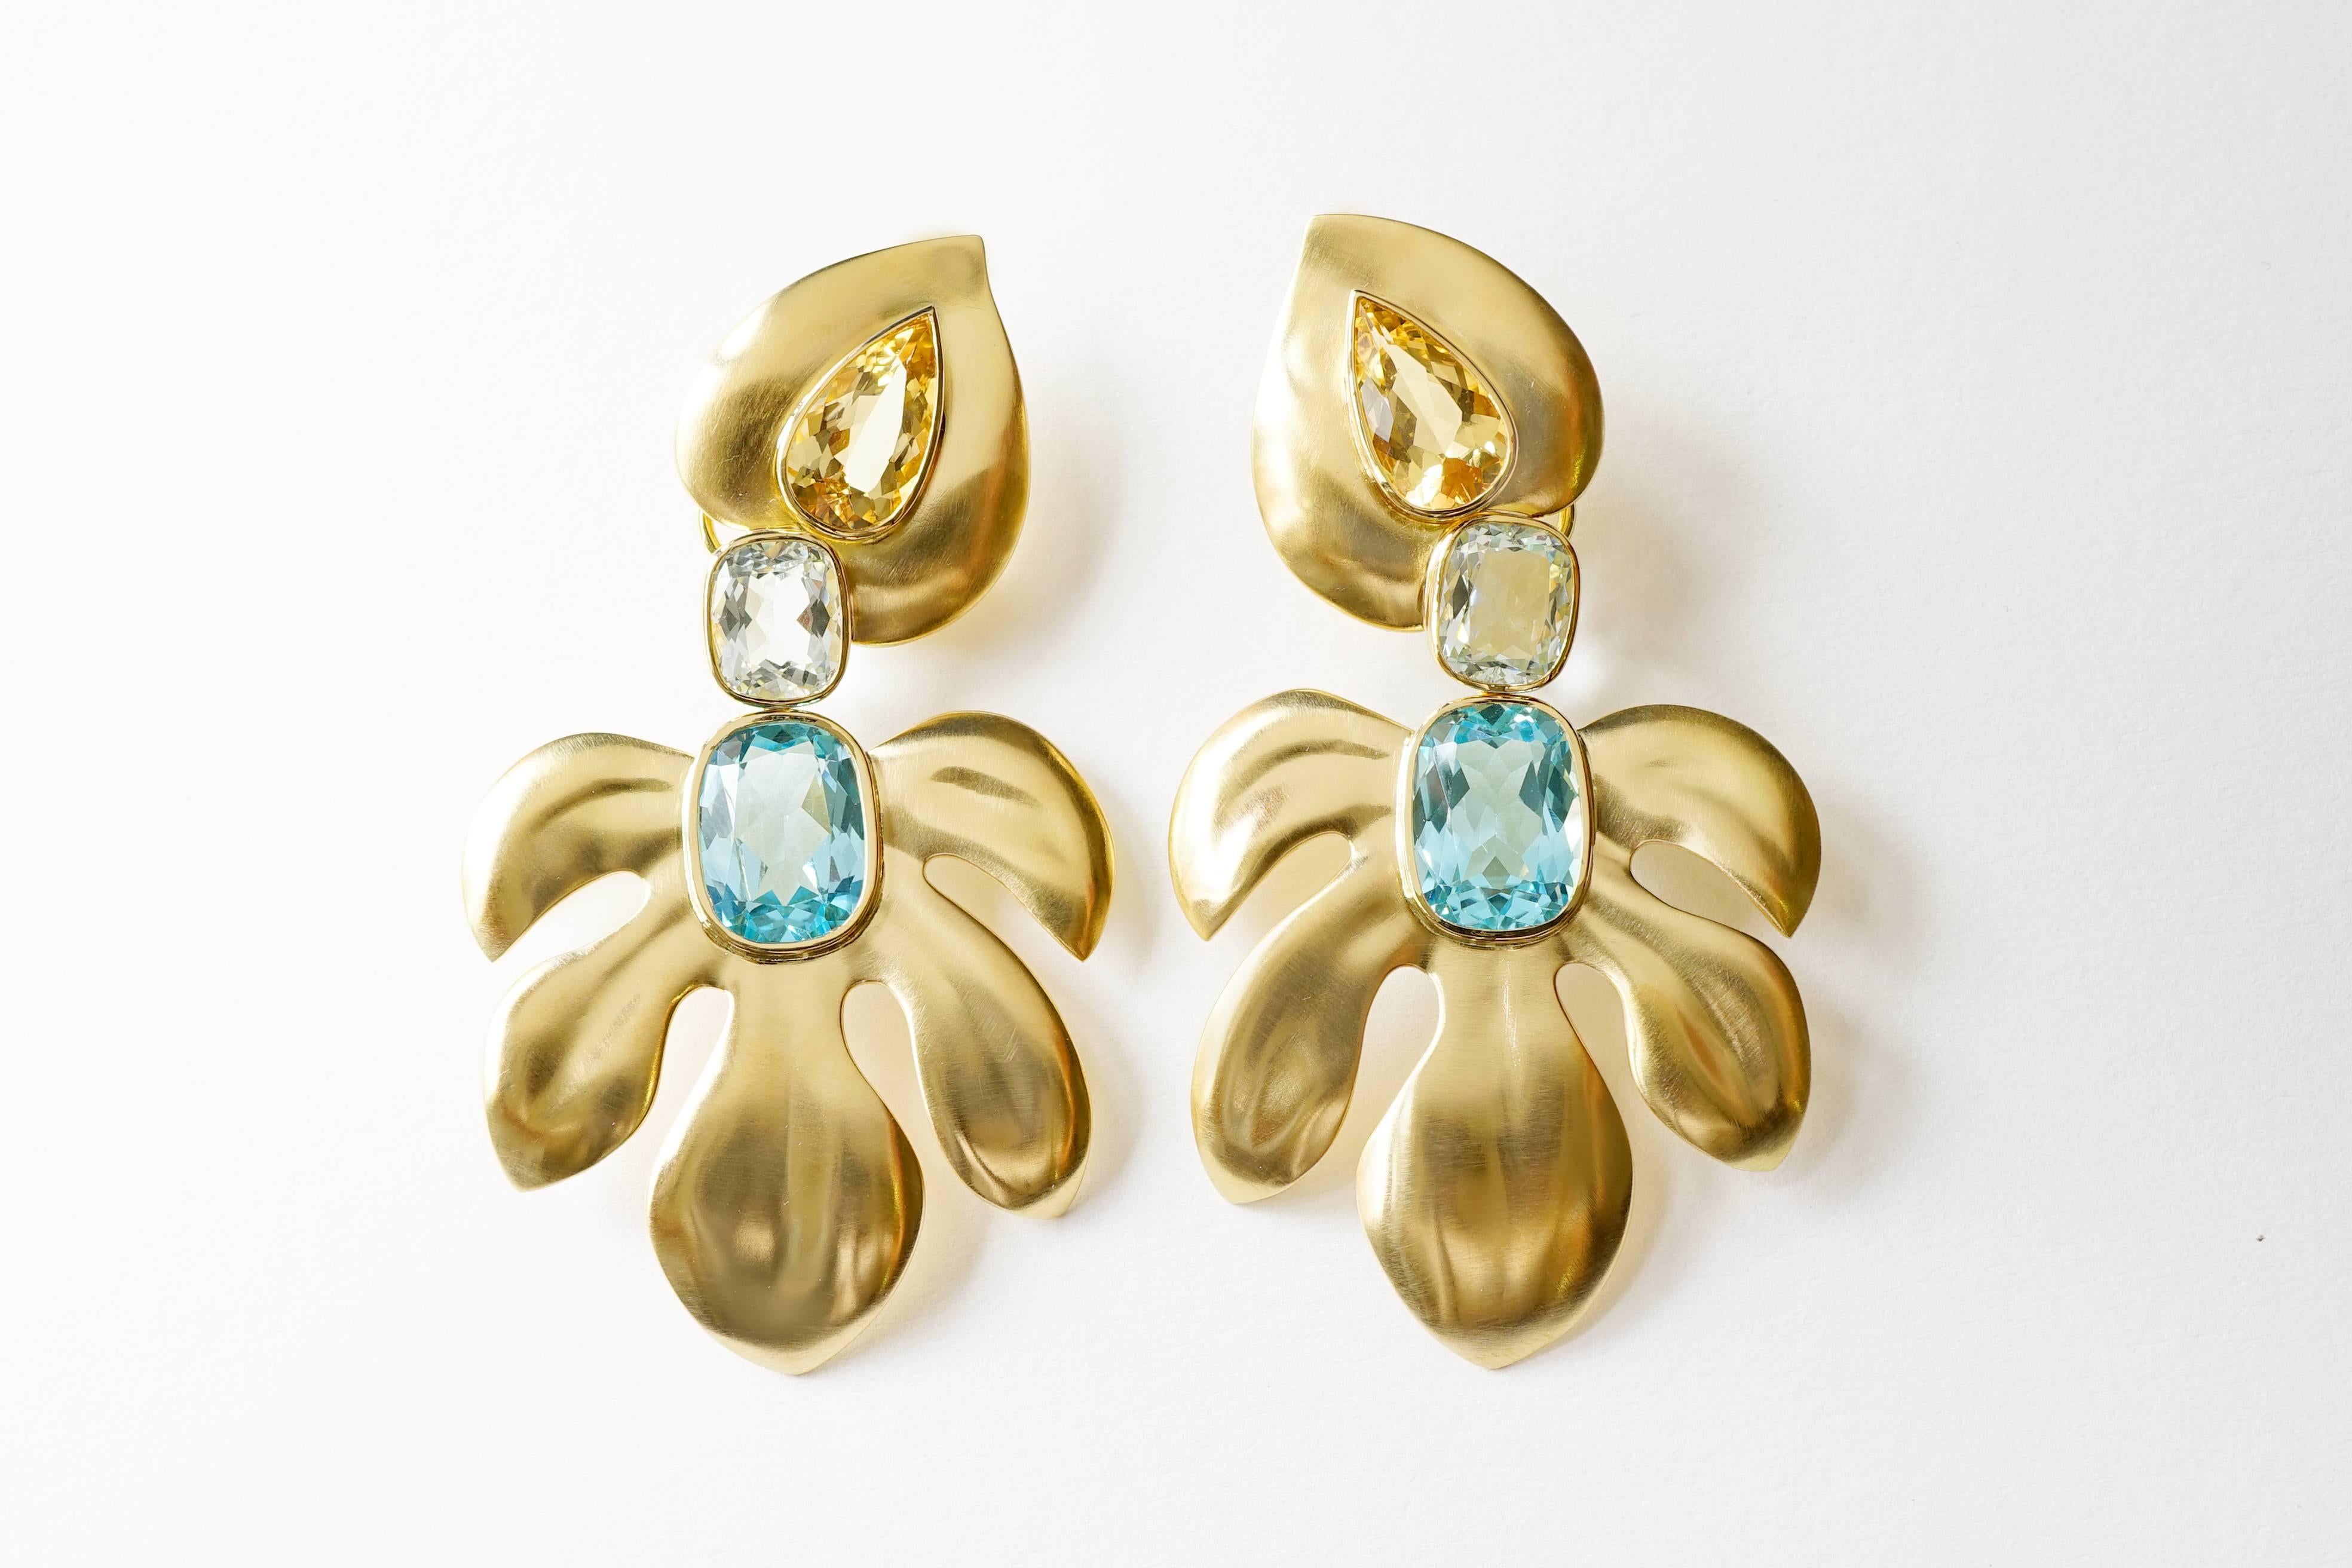 Contemporary Coralie Van Caloen 18k Gold Beryl And Aquamarine Tropical Clip-on Earrings For Sale